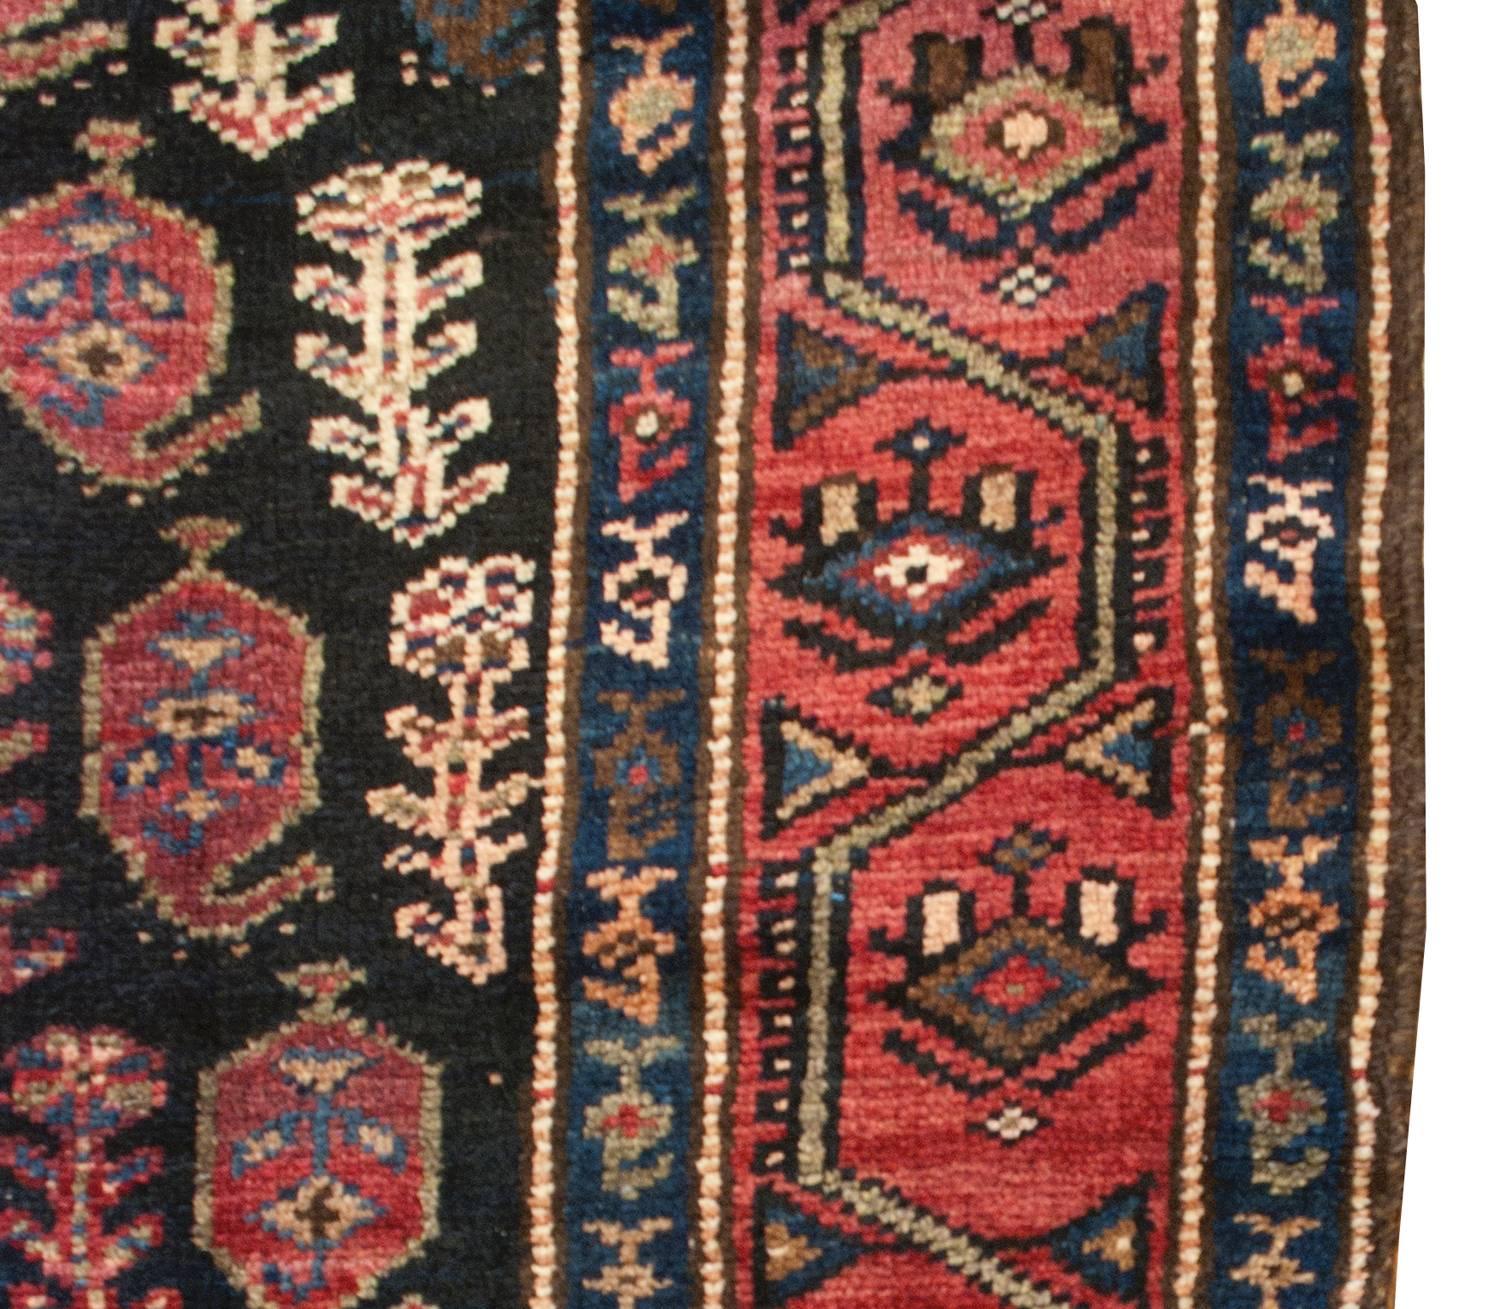 A wonderful early 20th century Persian Lori runner with an incredible all-over pattern of multi-colored paisleys with alternating trees-of-life patterns on a black background. The field is surrounded by multiple narrow and wide borders. The center